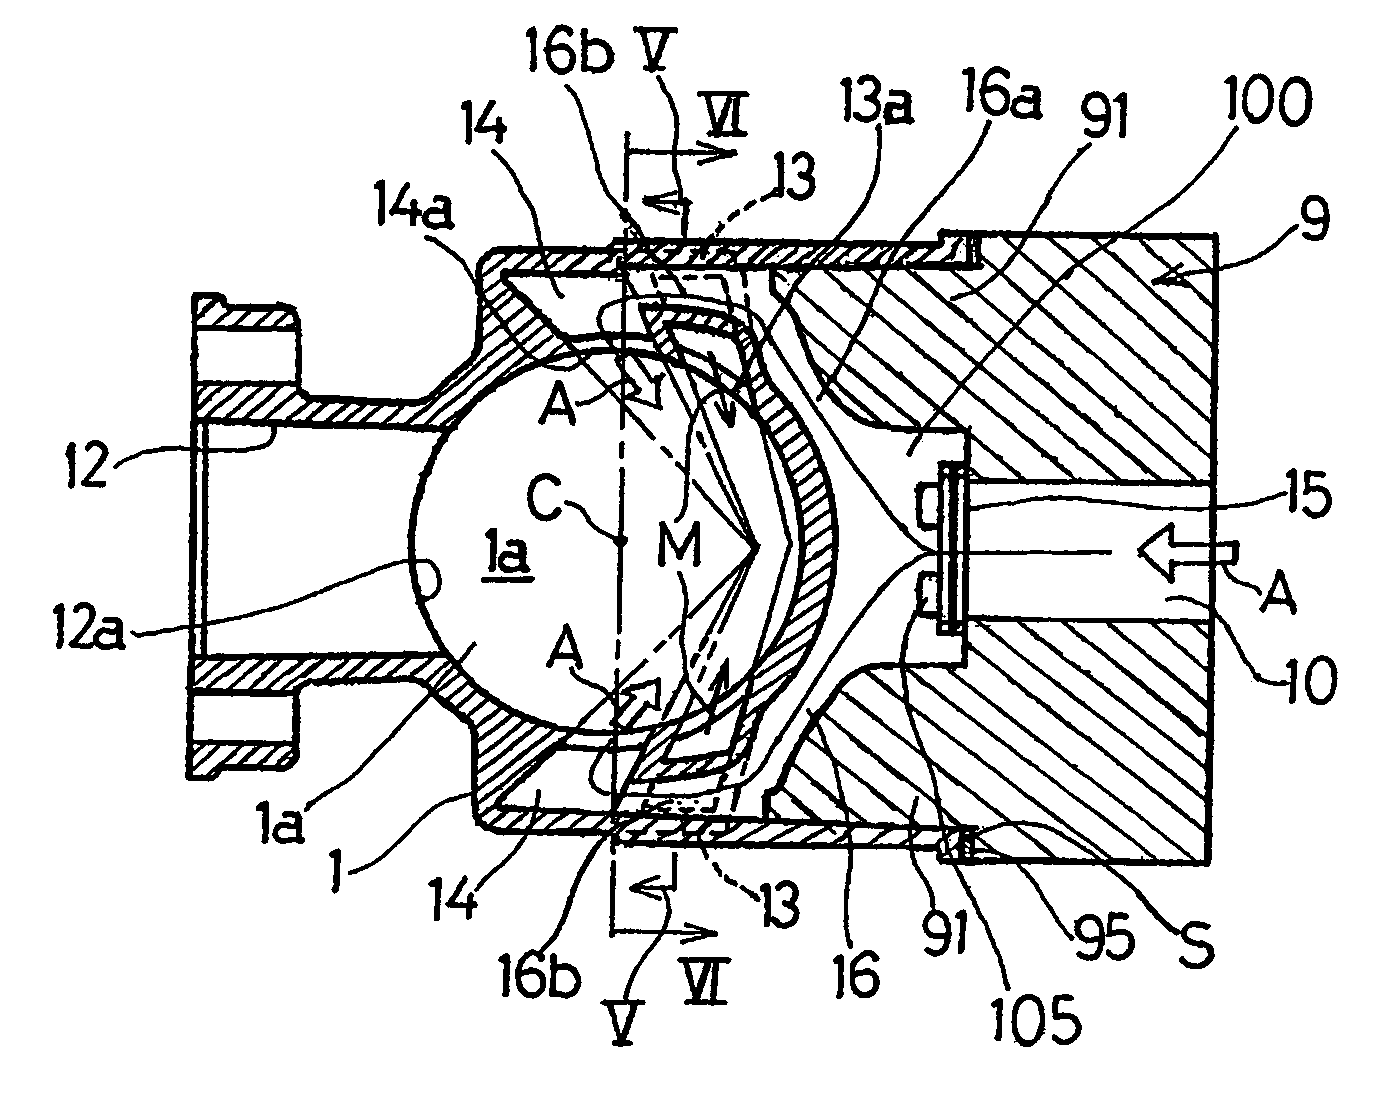 Two-cycle combustion engine with air scavenging system